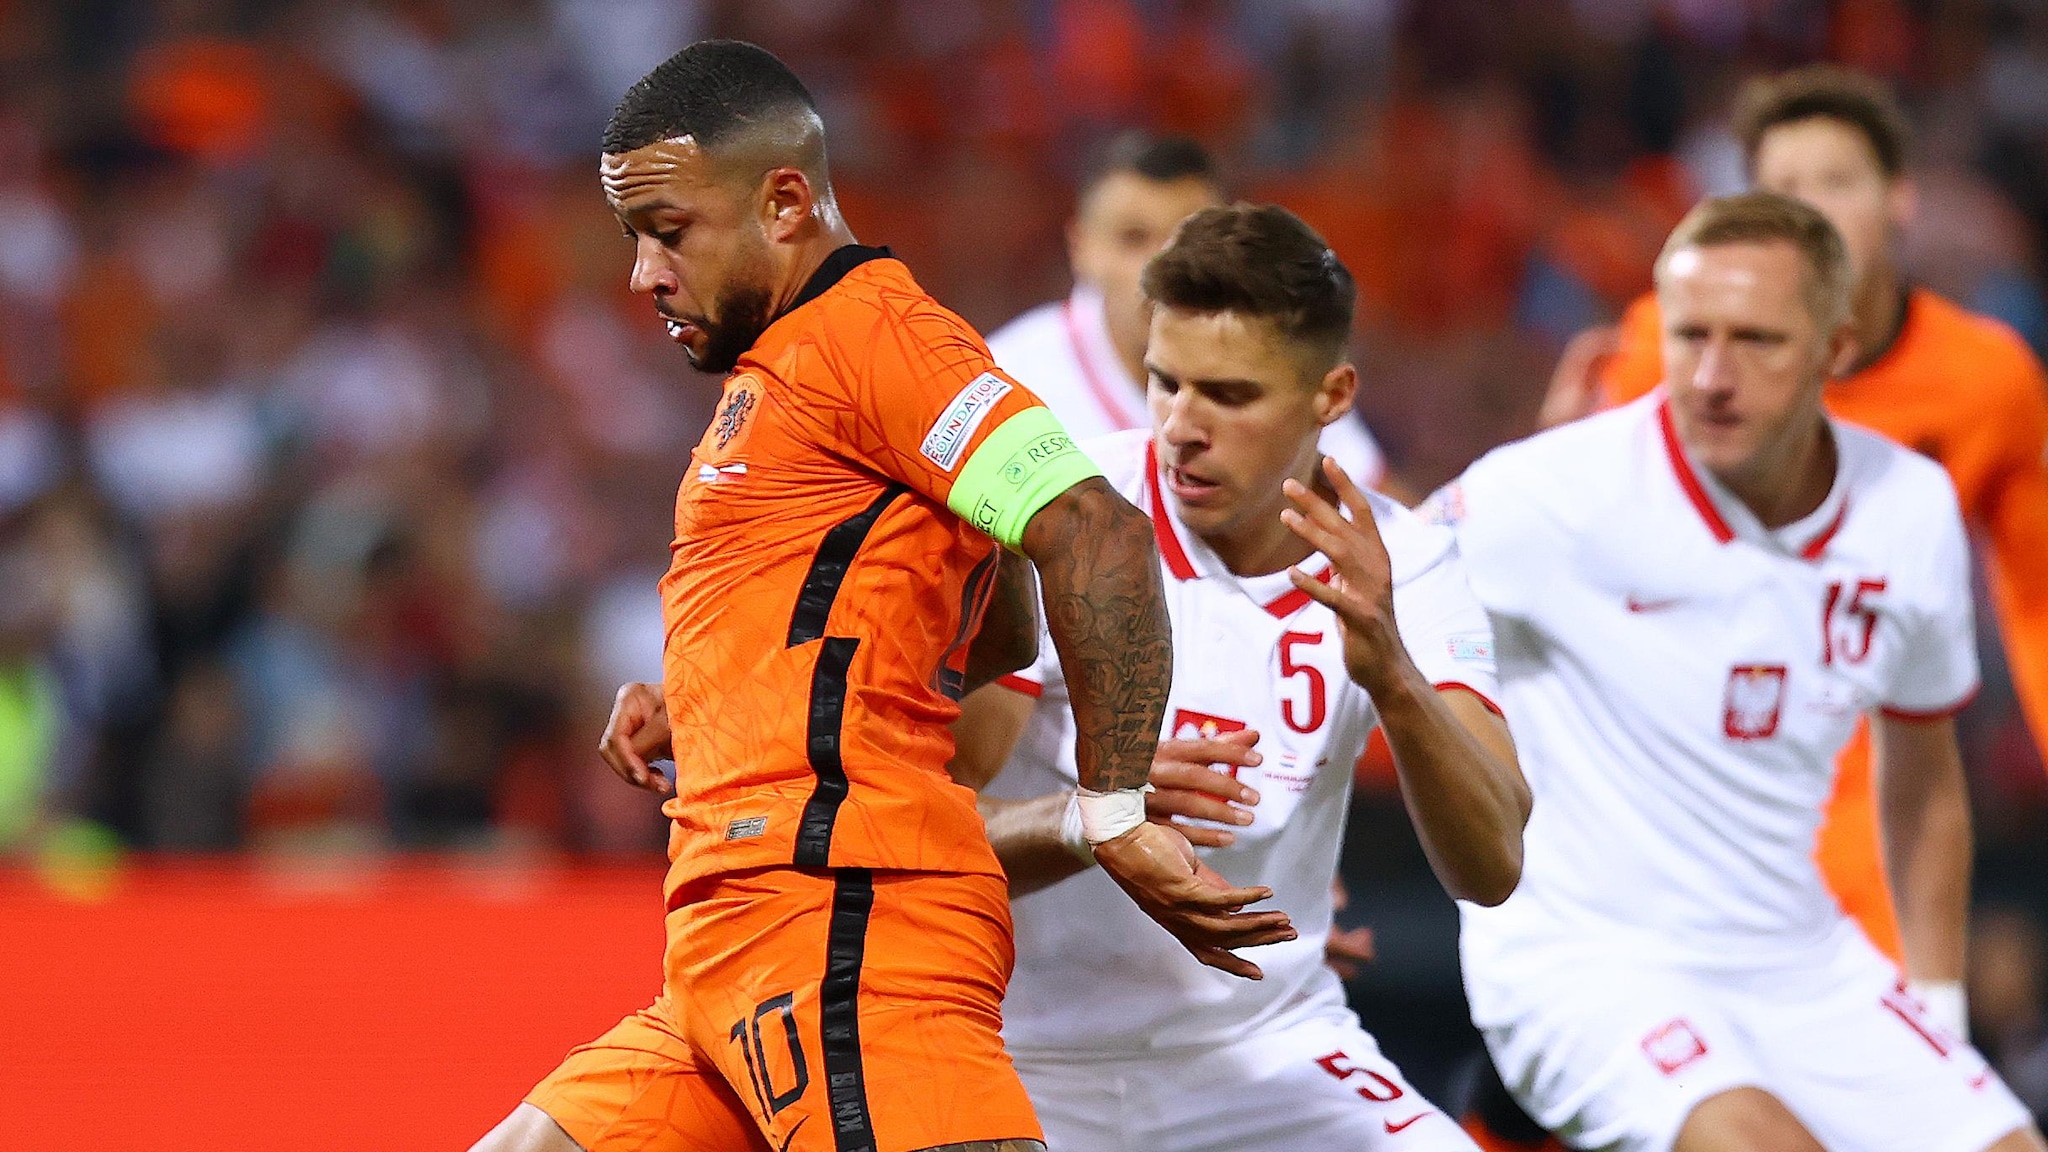 Netherlands 2-2 Poland: Depay misses late penalty as Dutch draw thriller |  UEFA Nations League | UEFA.com